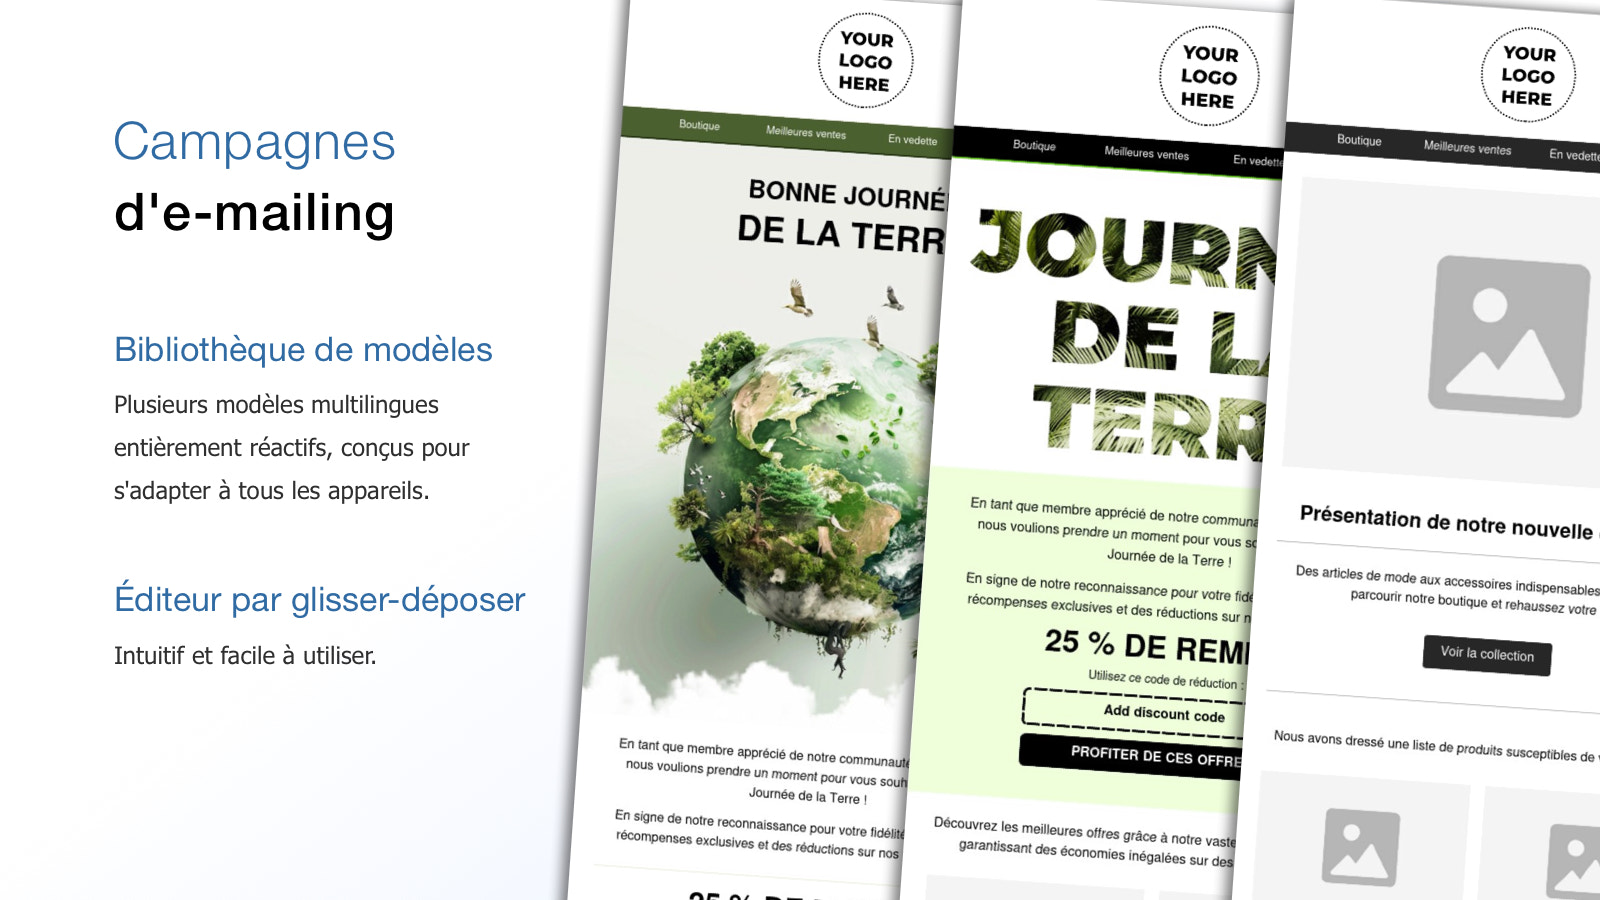 Campagnes d'e-mailing